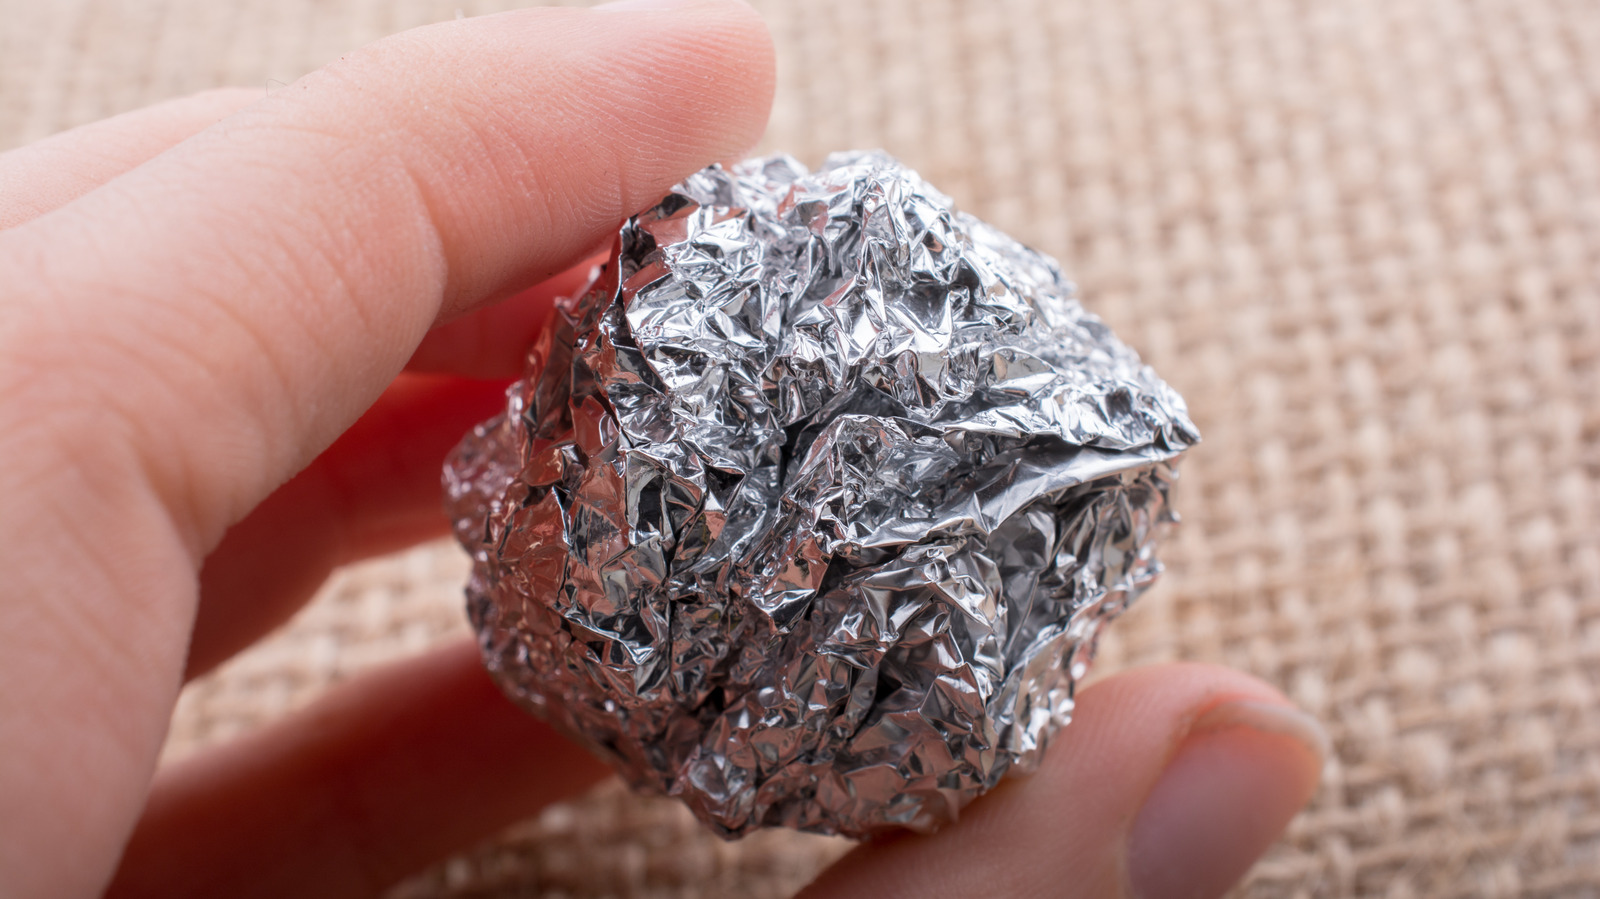 https://www.housedigest.com/img/gallery/what-really-happens-if-you-put-aluminum-foil-balls-in-the-dryer/l-intro-1616530660.jpg